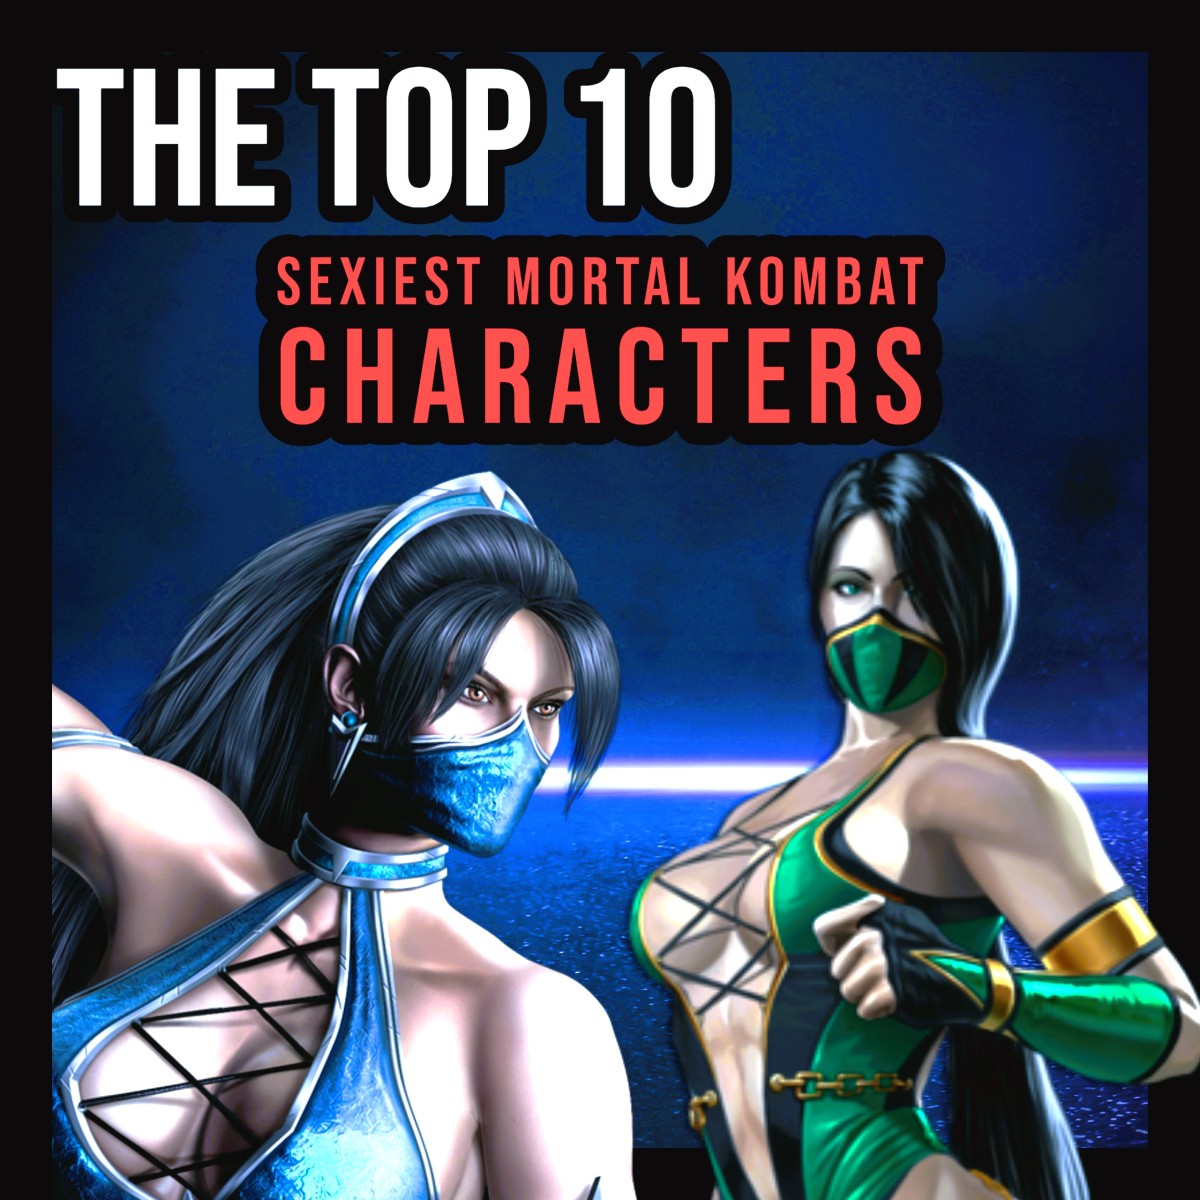 From Sonya Blade to Kitana, this article ranks the 10 sexiest characters in Mortal Kombat. Did your favorite character make the top 10 list? Read on to find out!